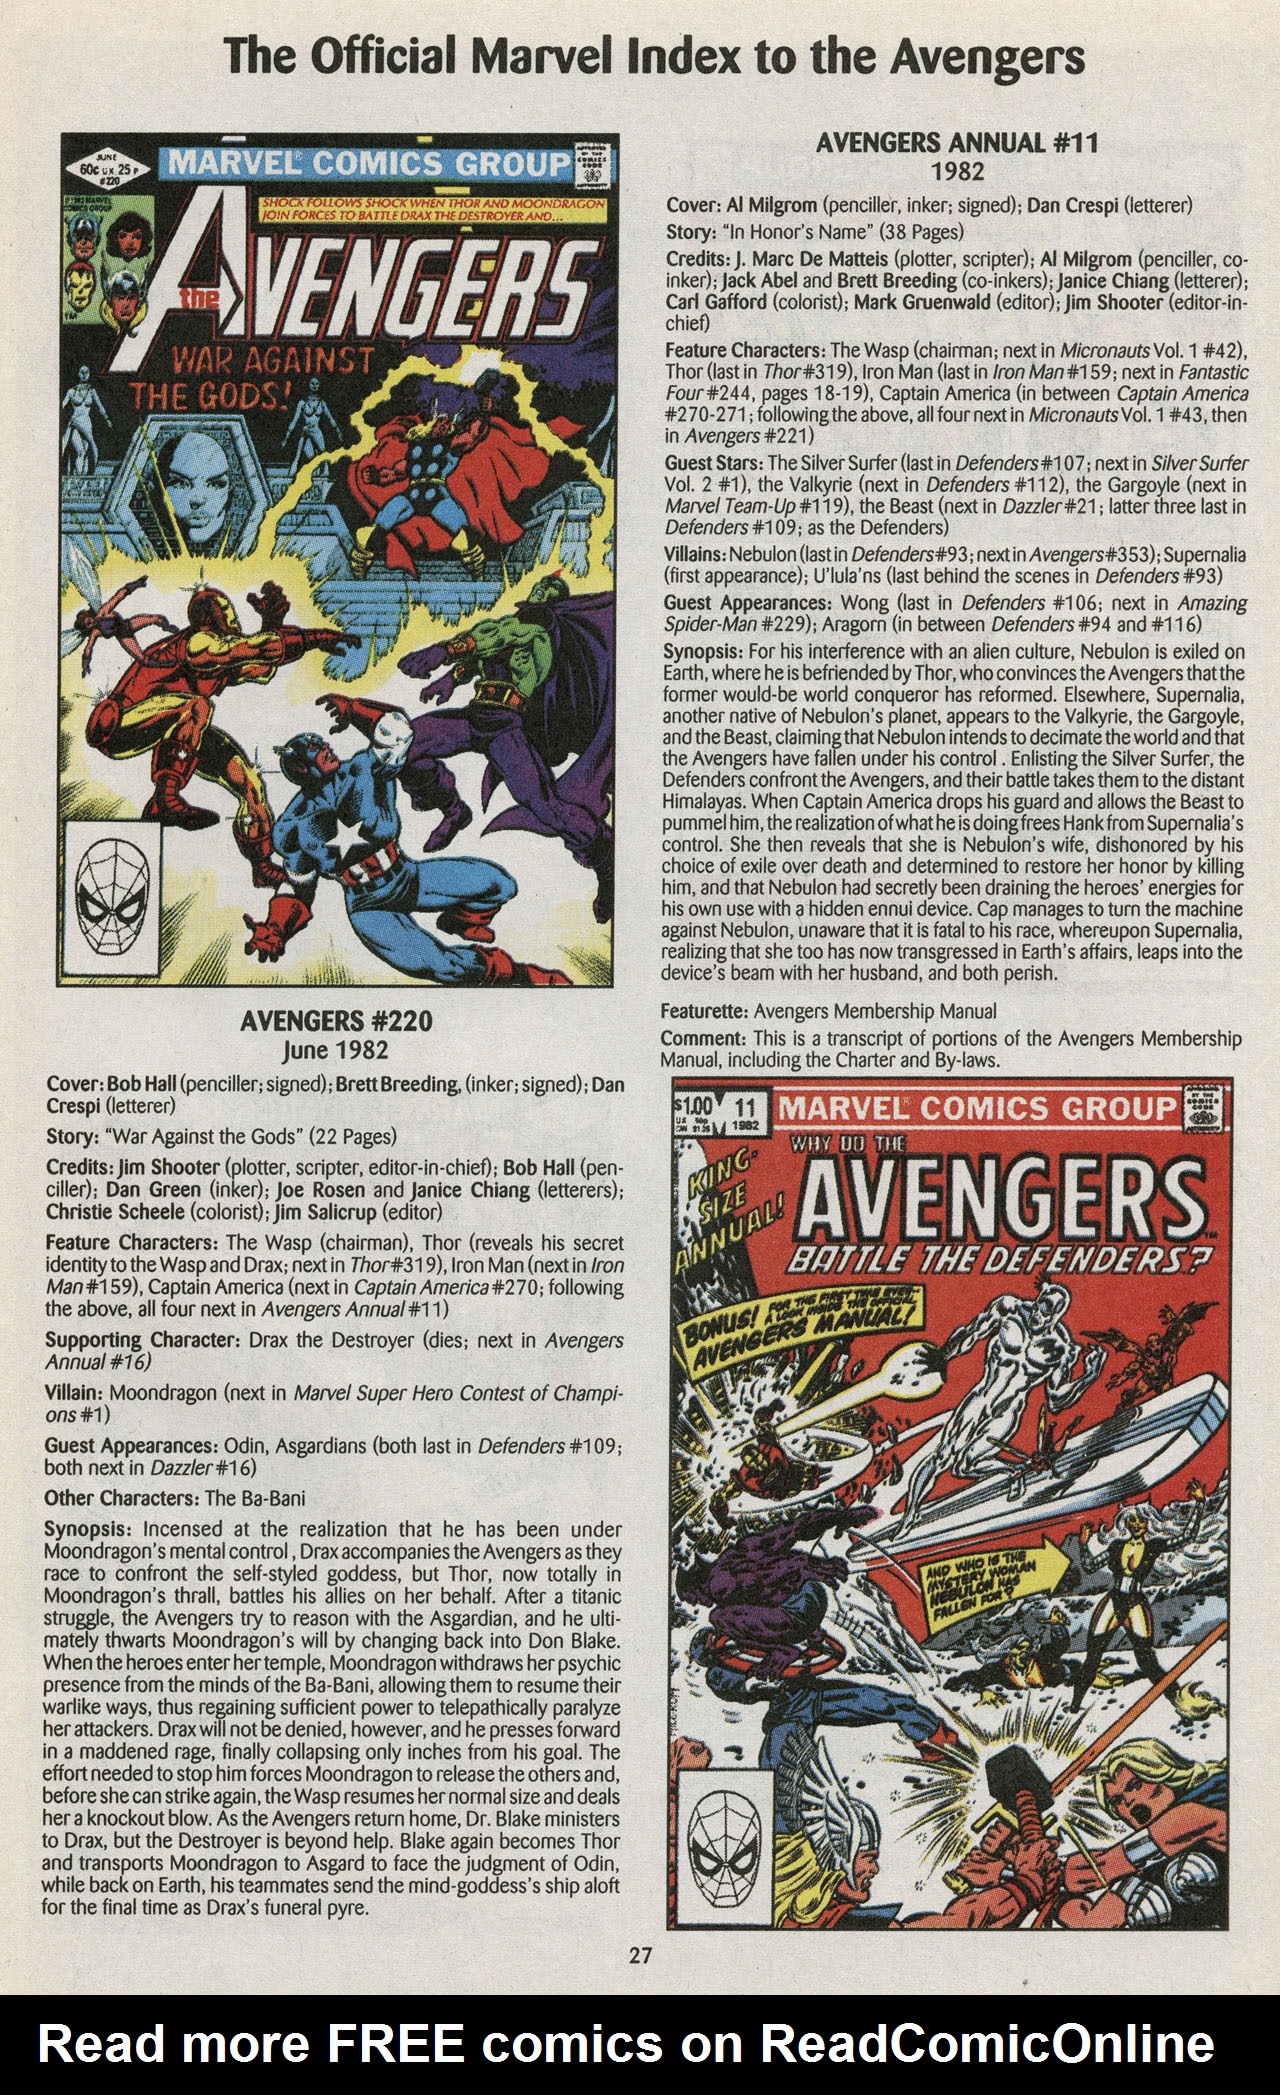 Read online The Official Marvel Index to the Avengers comic -  Issue #4 - 29